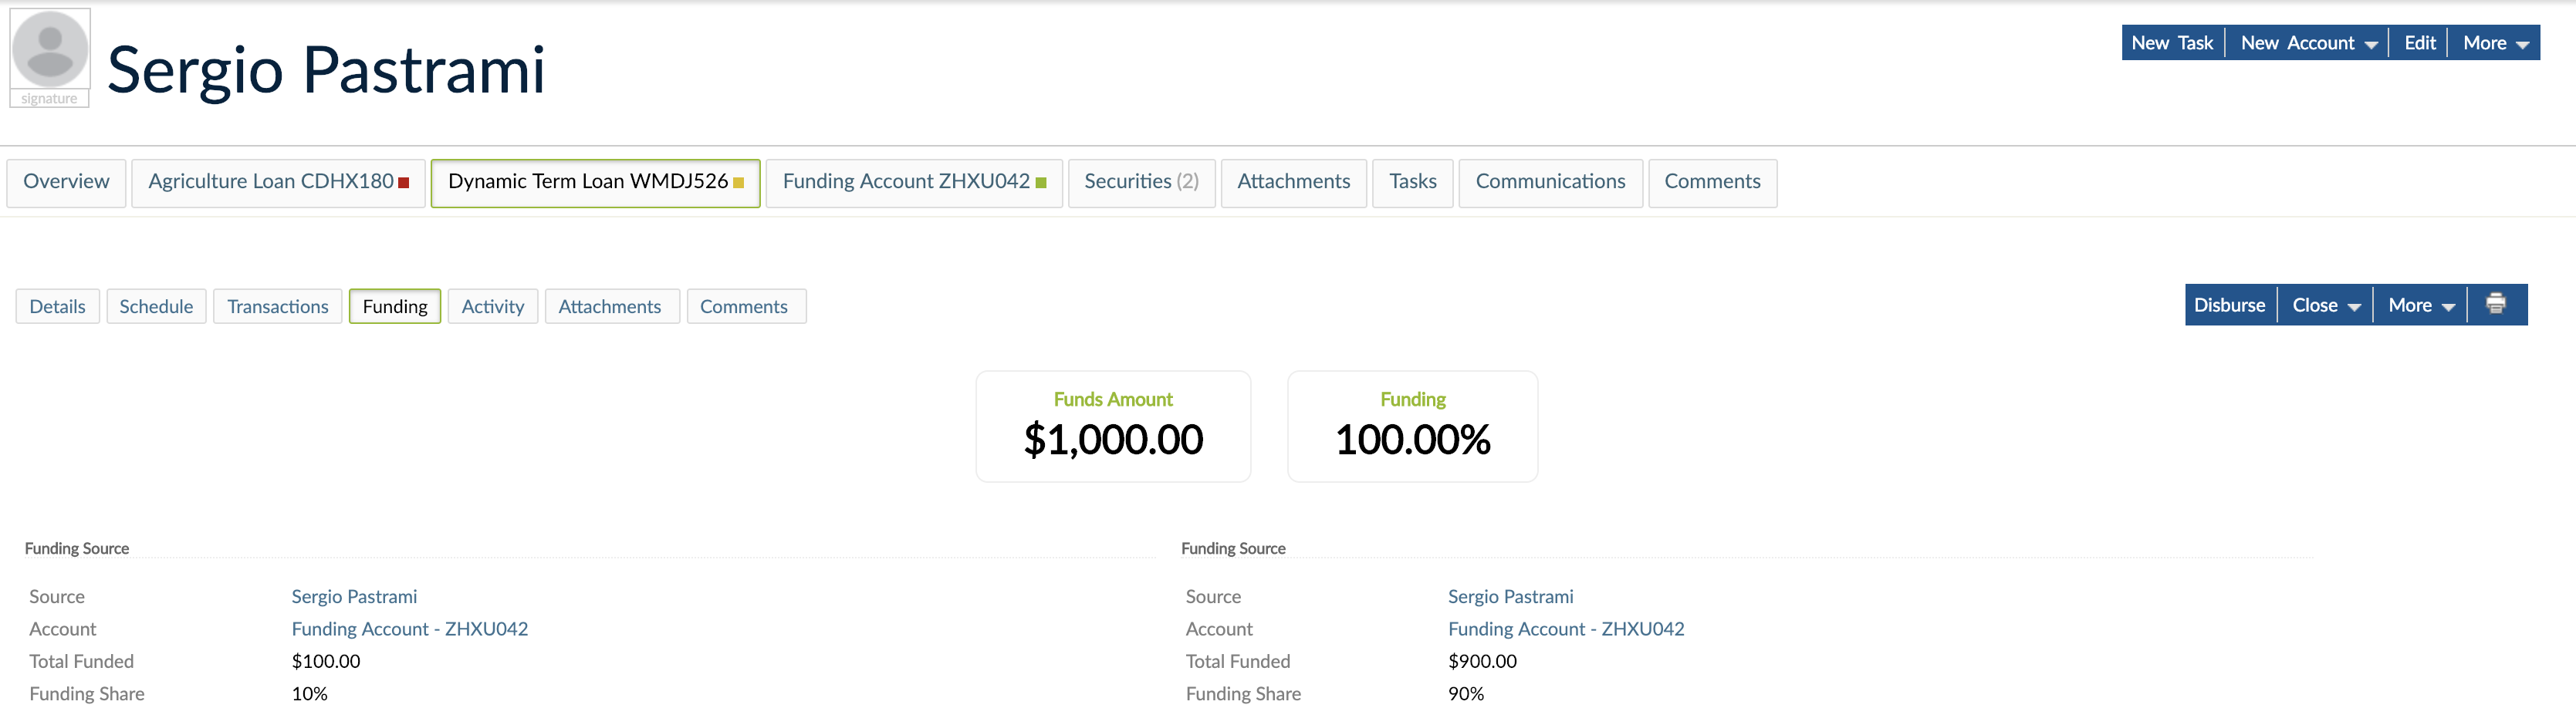 Funding view from Loan Account with Funds Amount and Funding percentage.